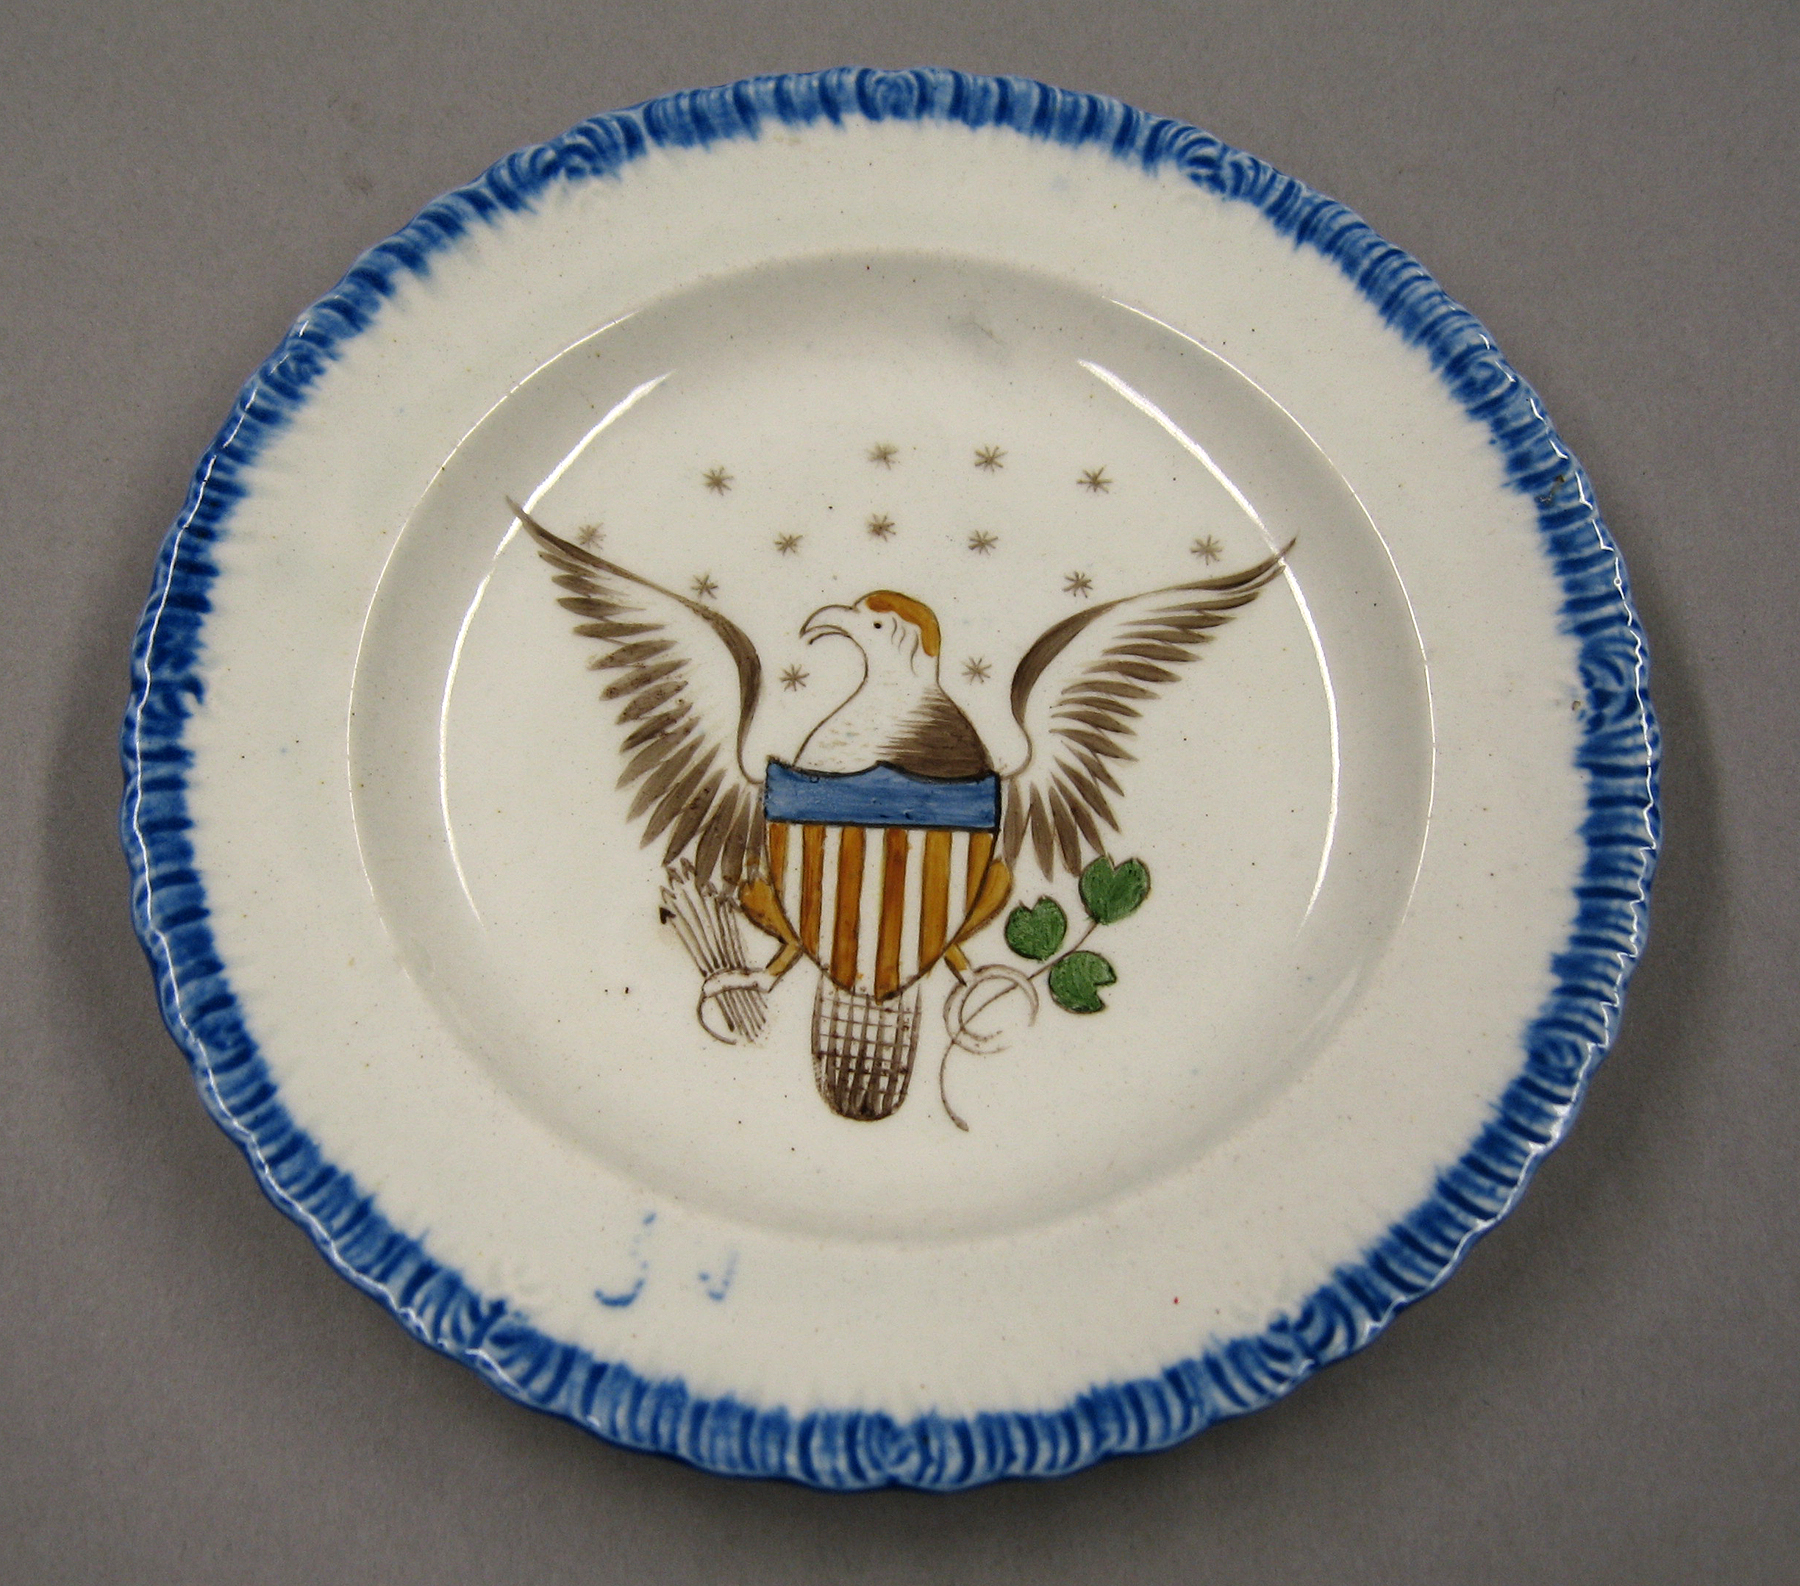 1954.0003.013 Cup plate